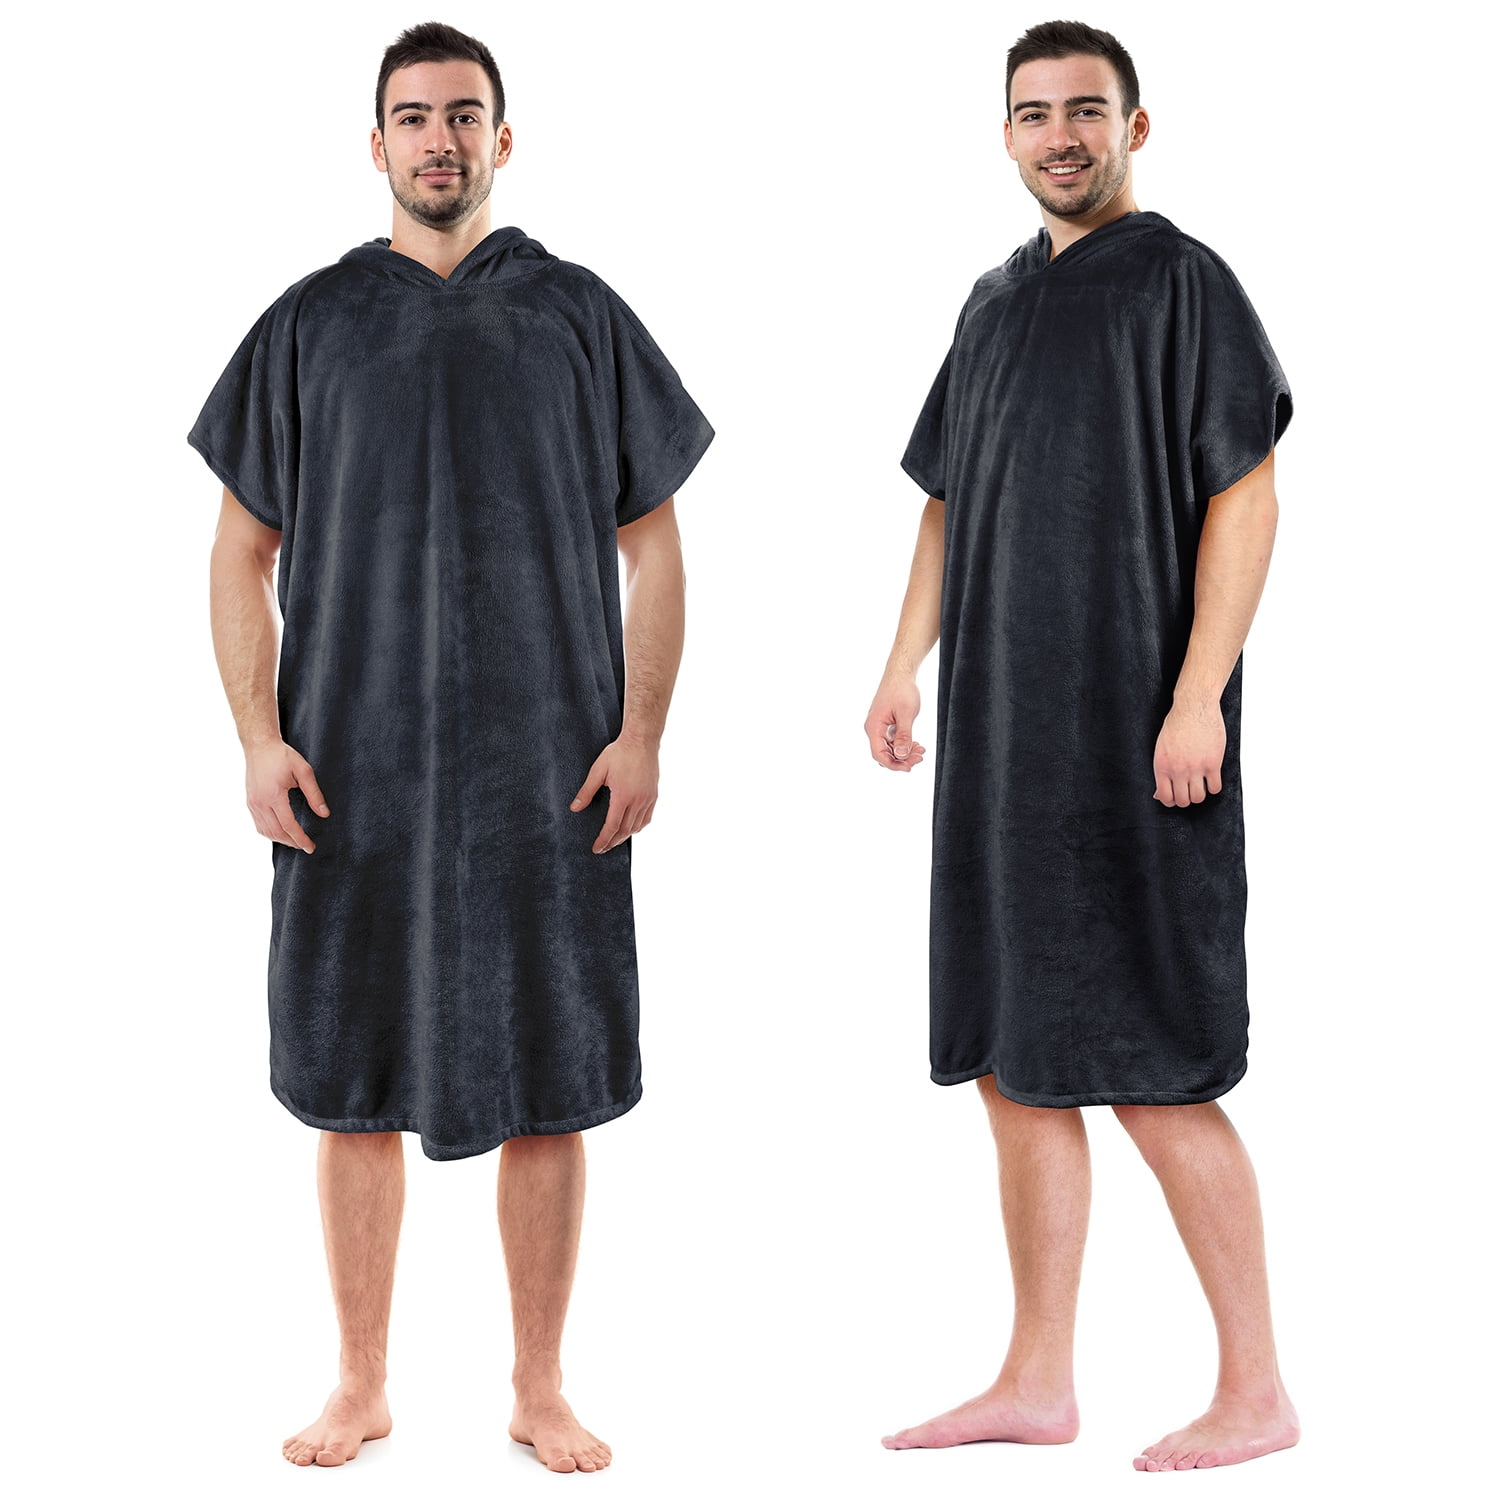 Ooded Towel Poncho Adult Sleeveless Changing Robe Beach Wetsuit for Surfe*W 